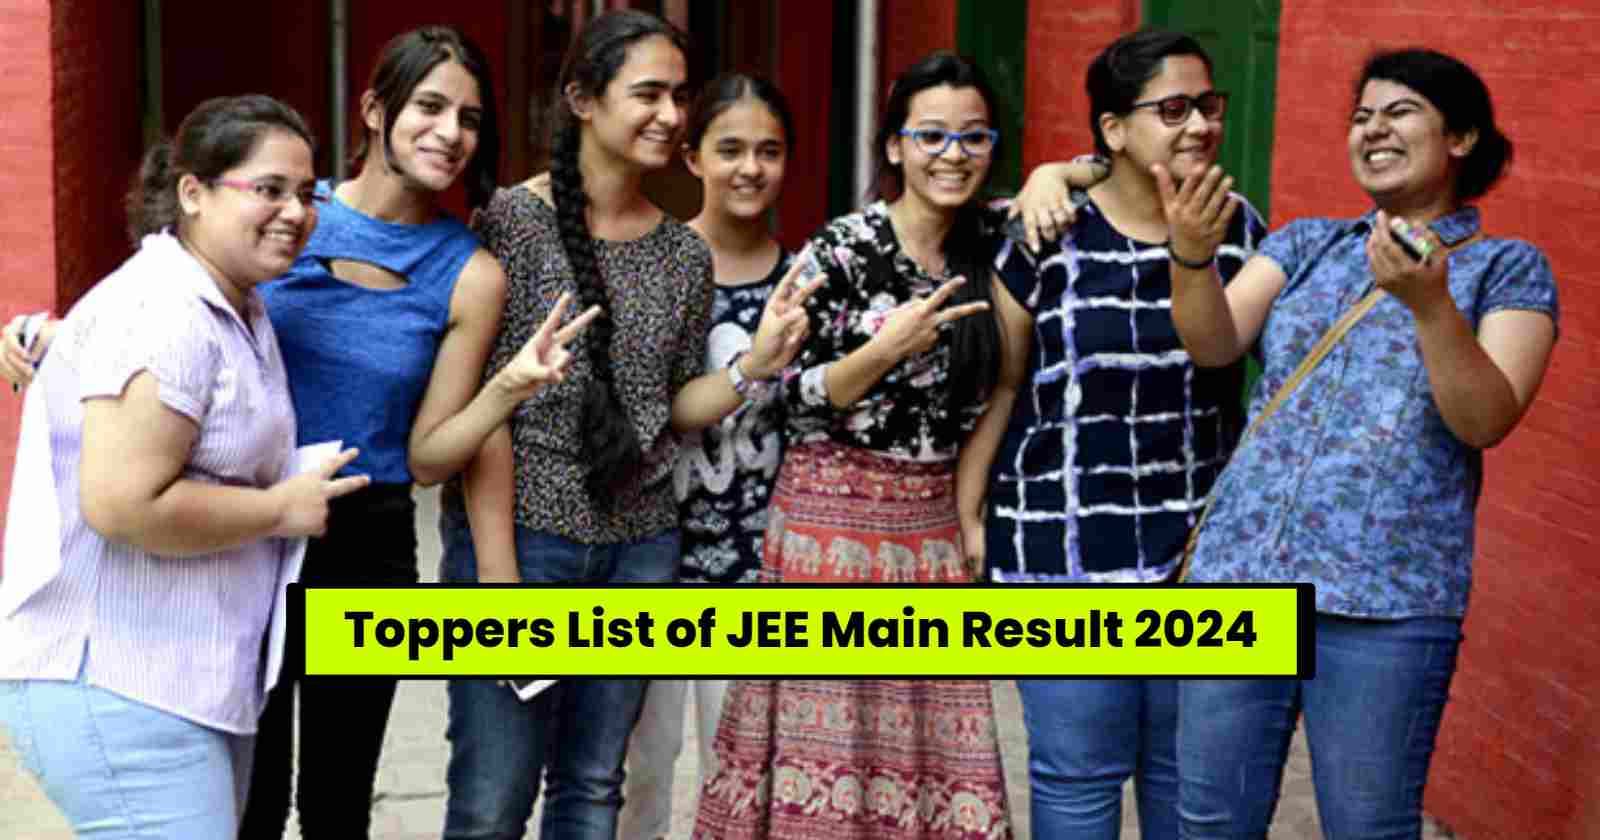 Toppers List of JEE Main Result 2024